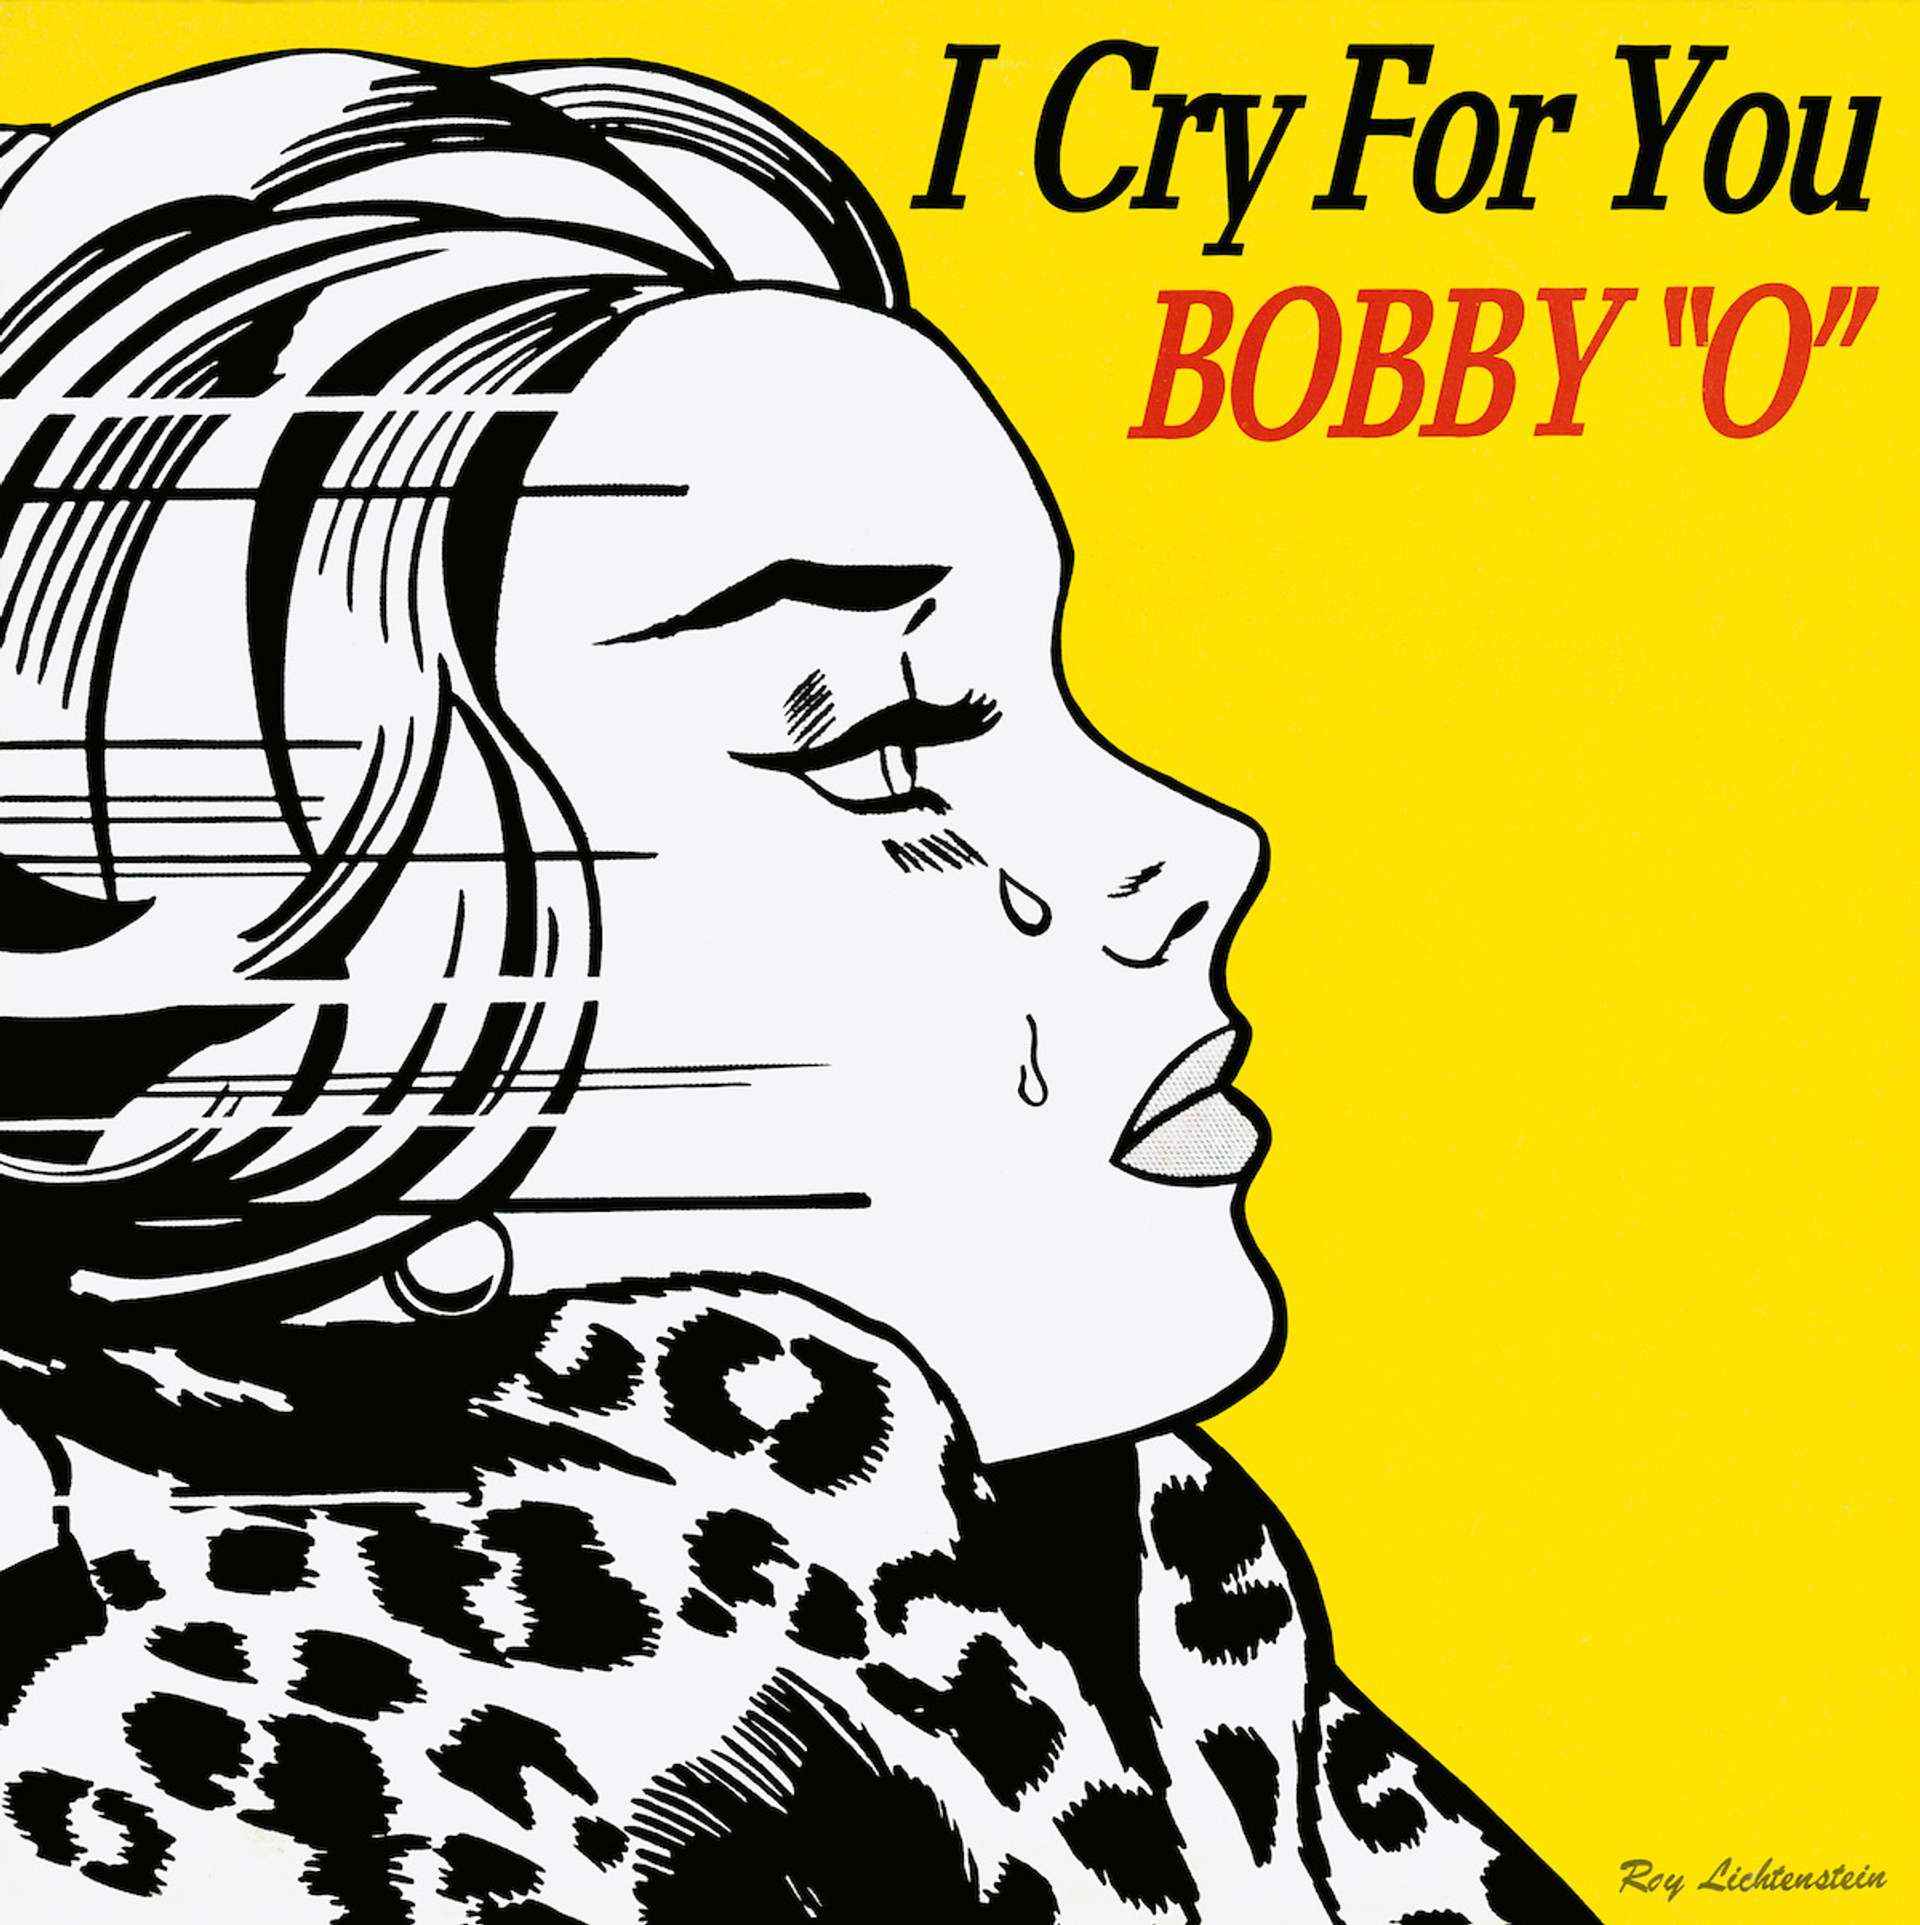 An image of the album cover for I Cry For You, designed by artist Roy Lichtenstein. It shows a monochrome crying woman against a bright yellow background. She is depicted in Lichtenstein’s signature graphic style.